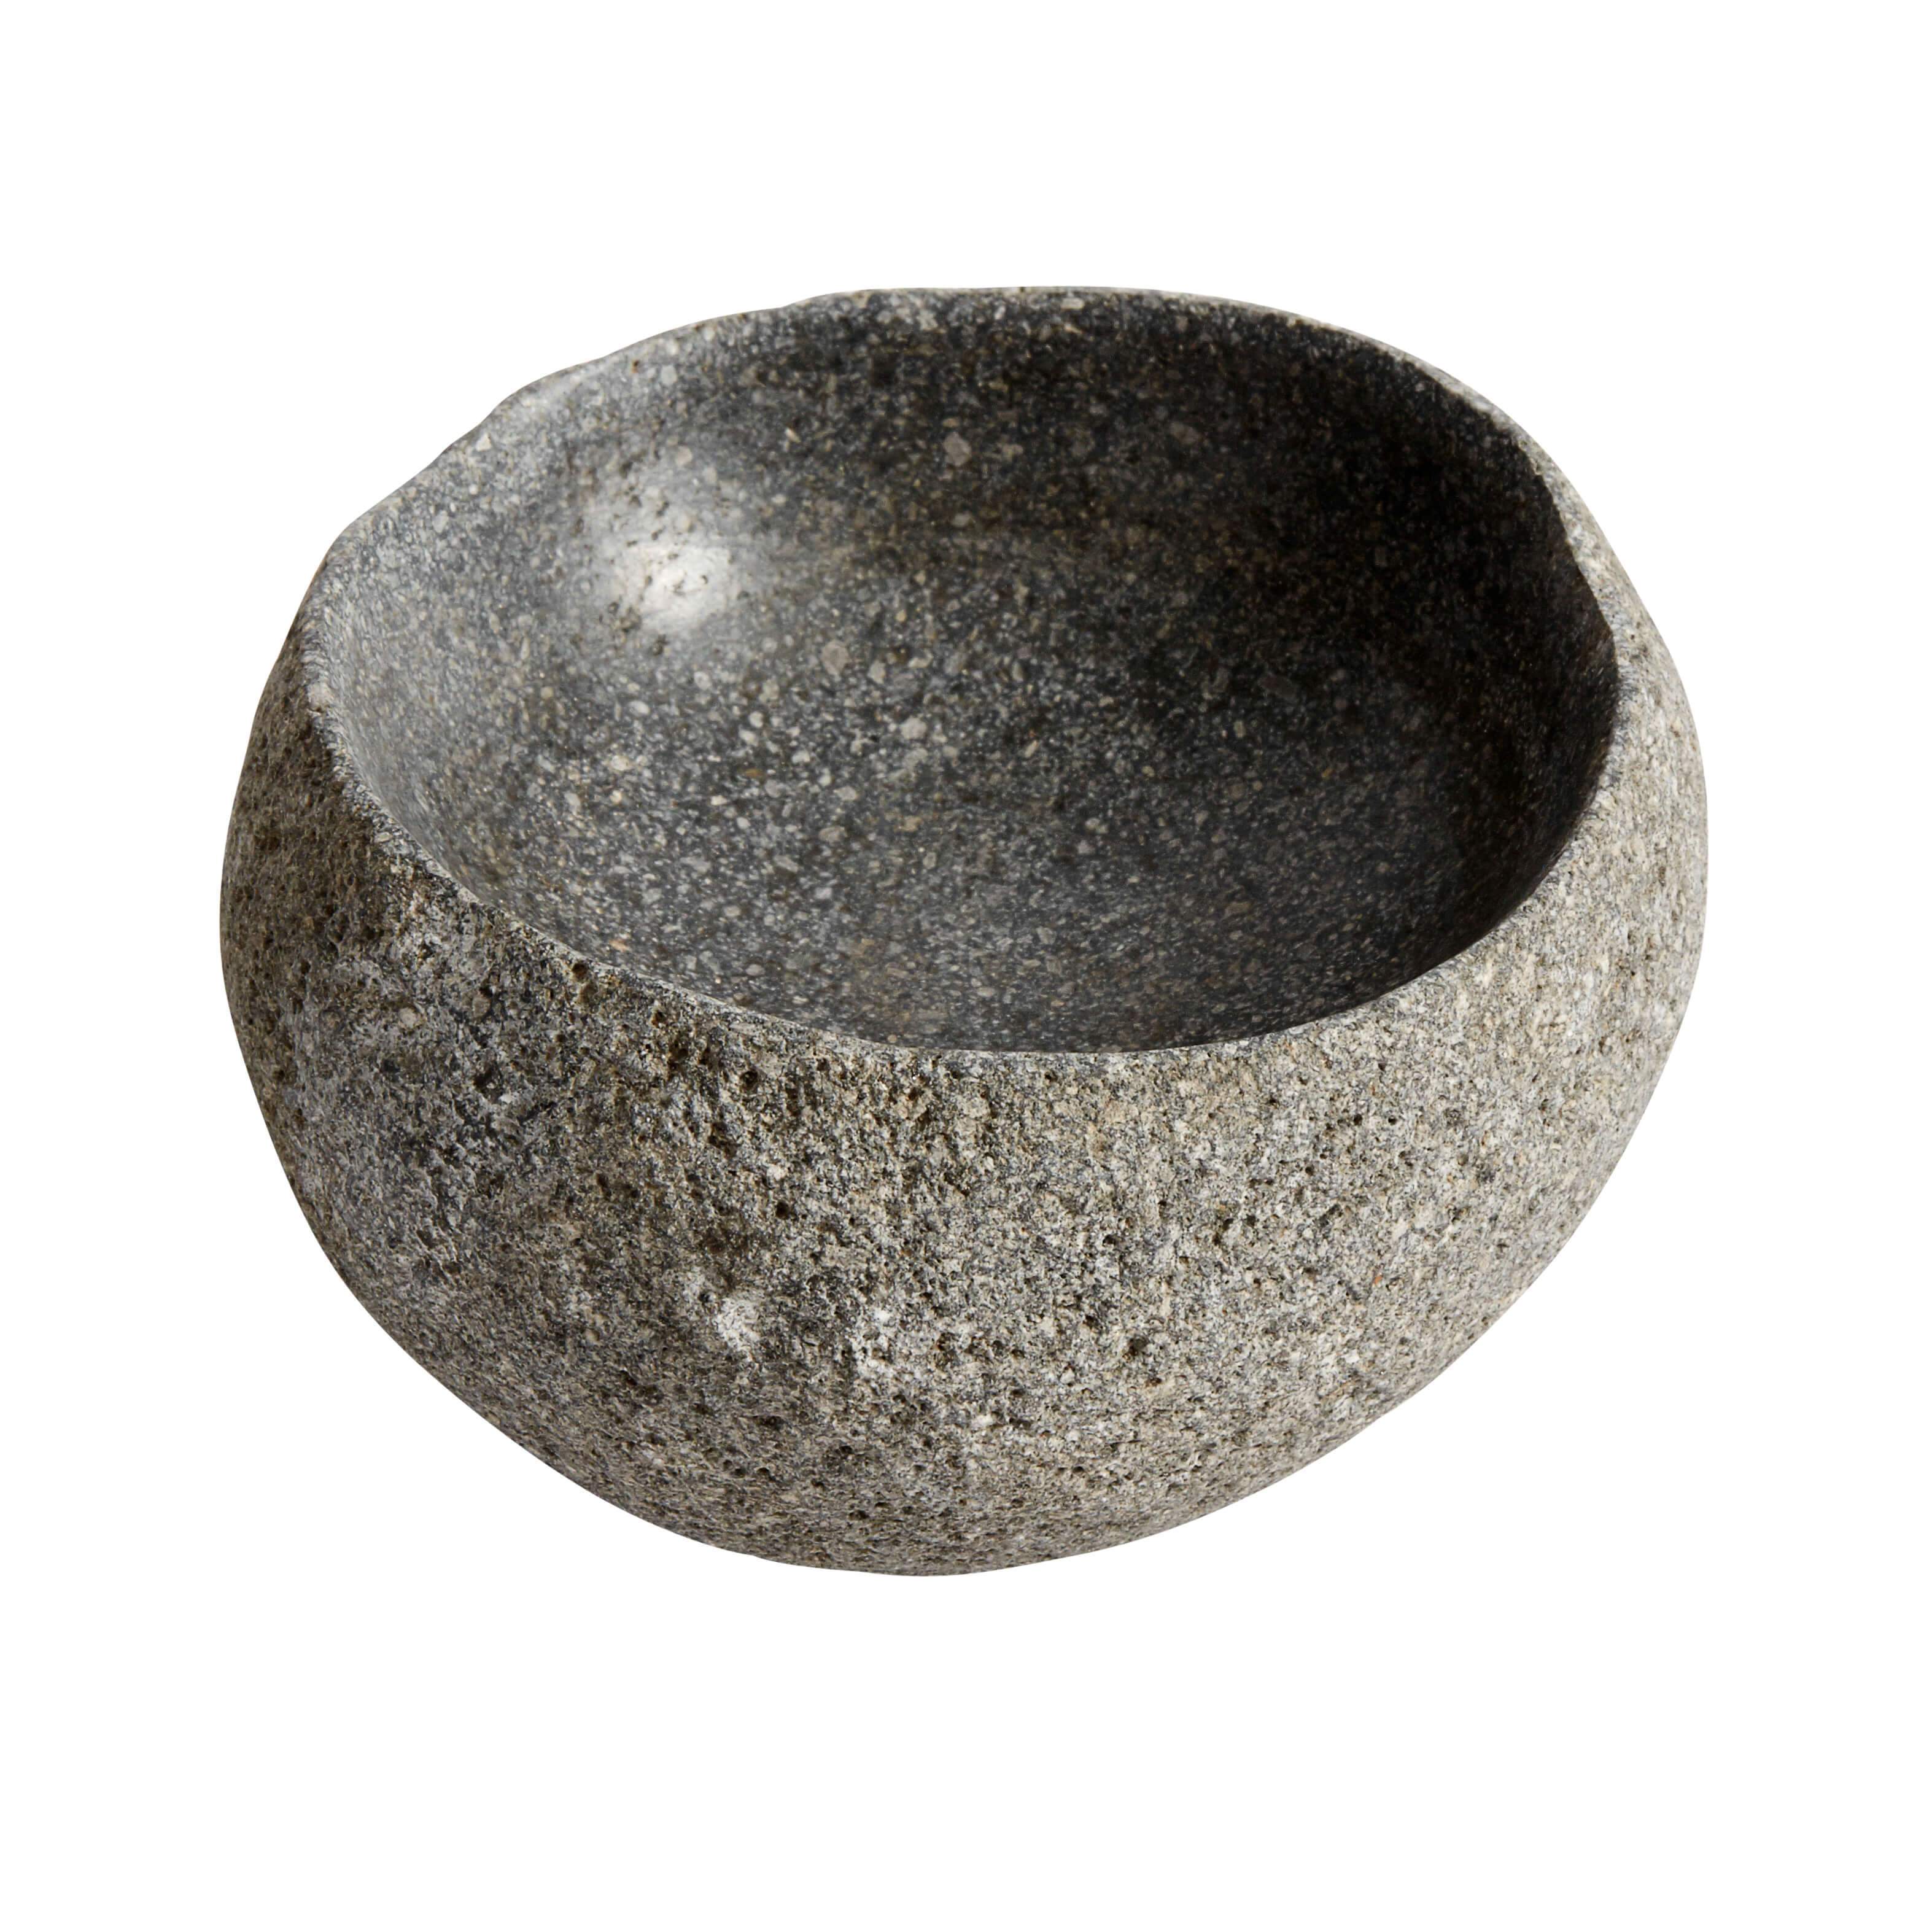 Muubs Valley Bowl Riverstone, 10cm